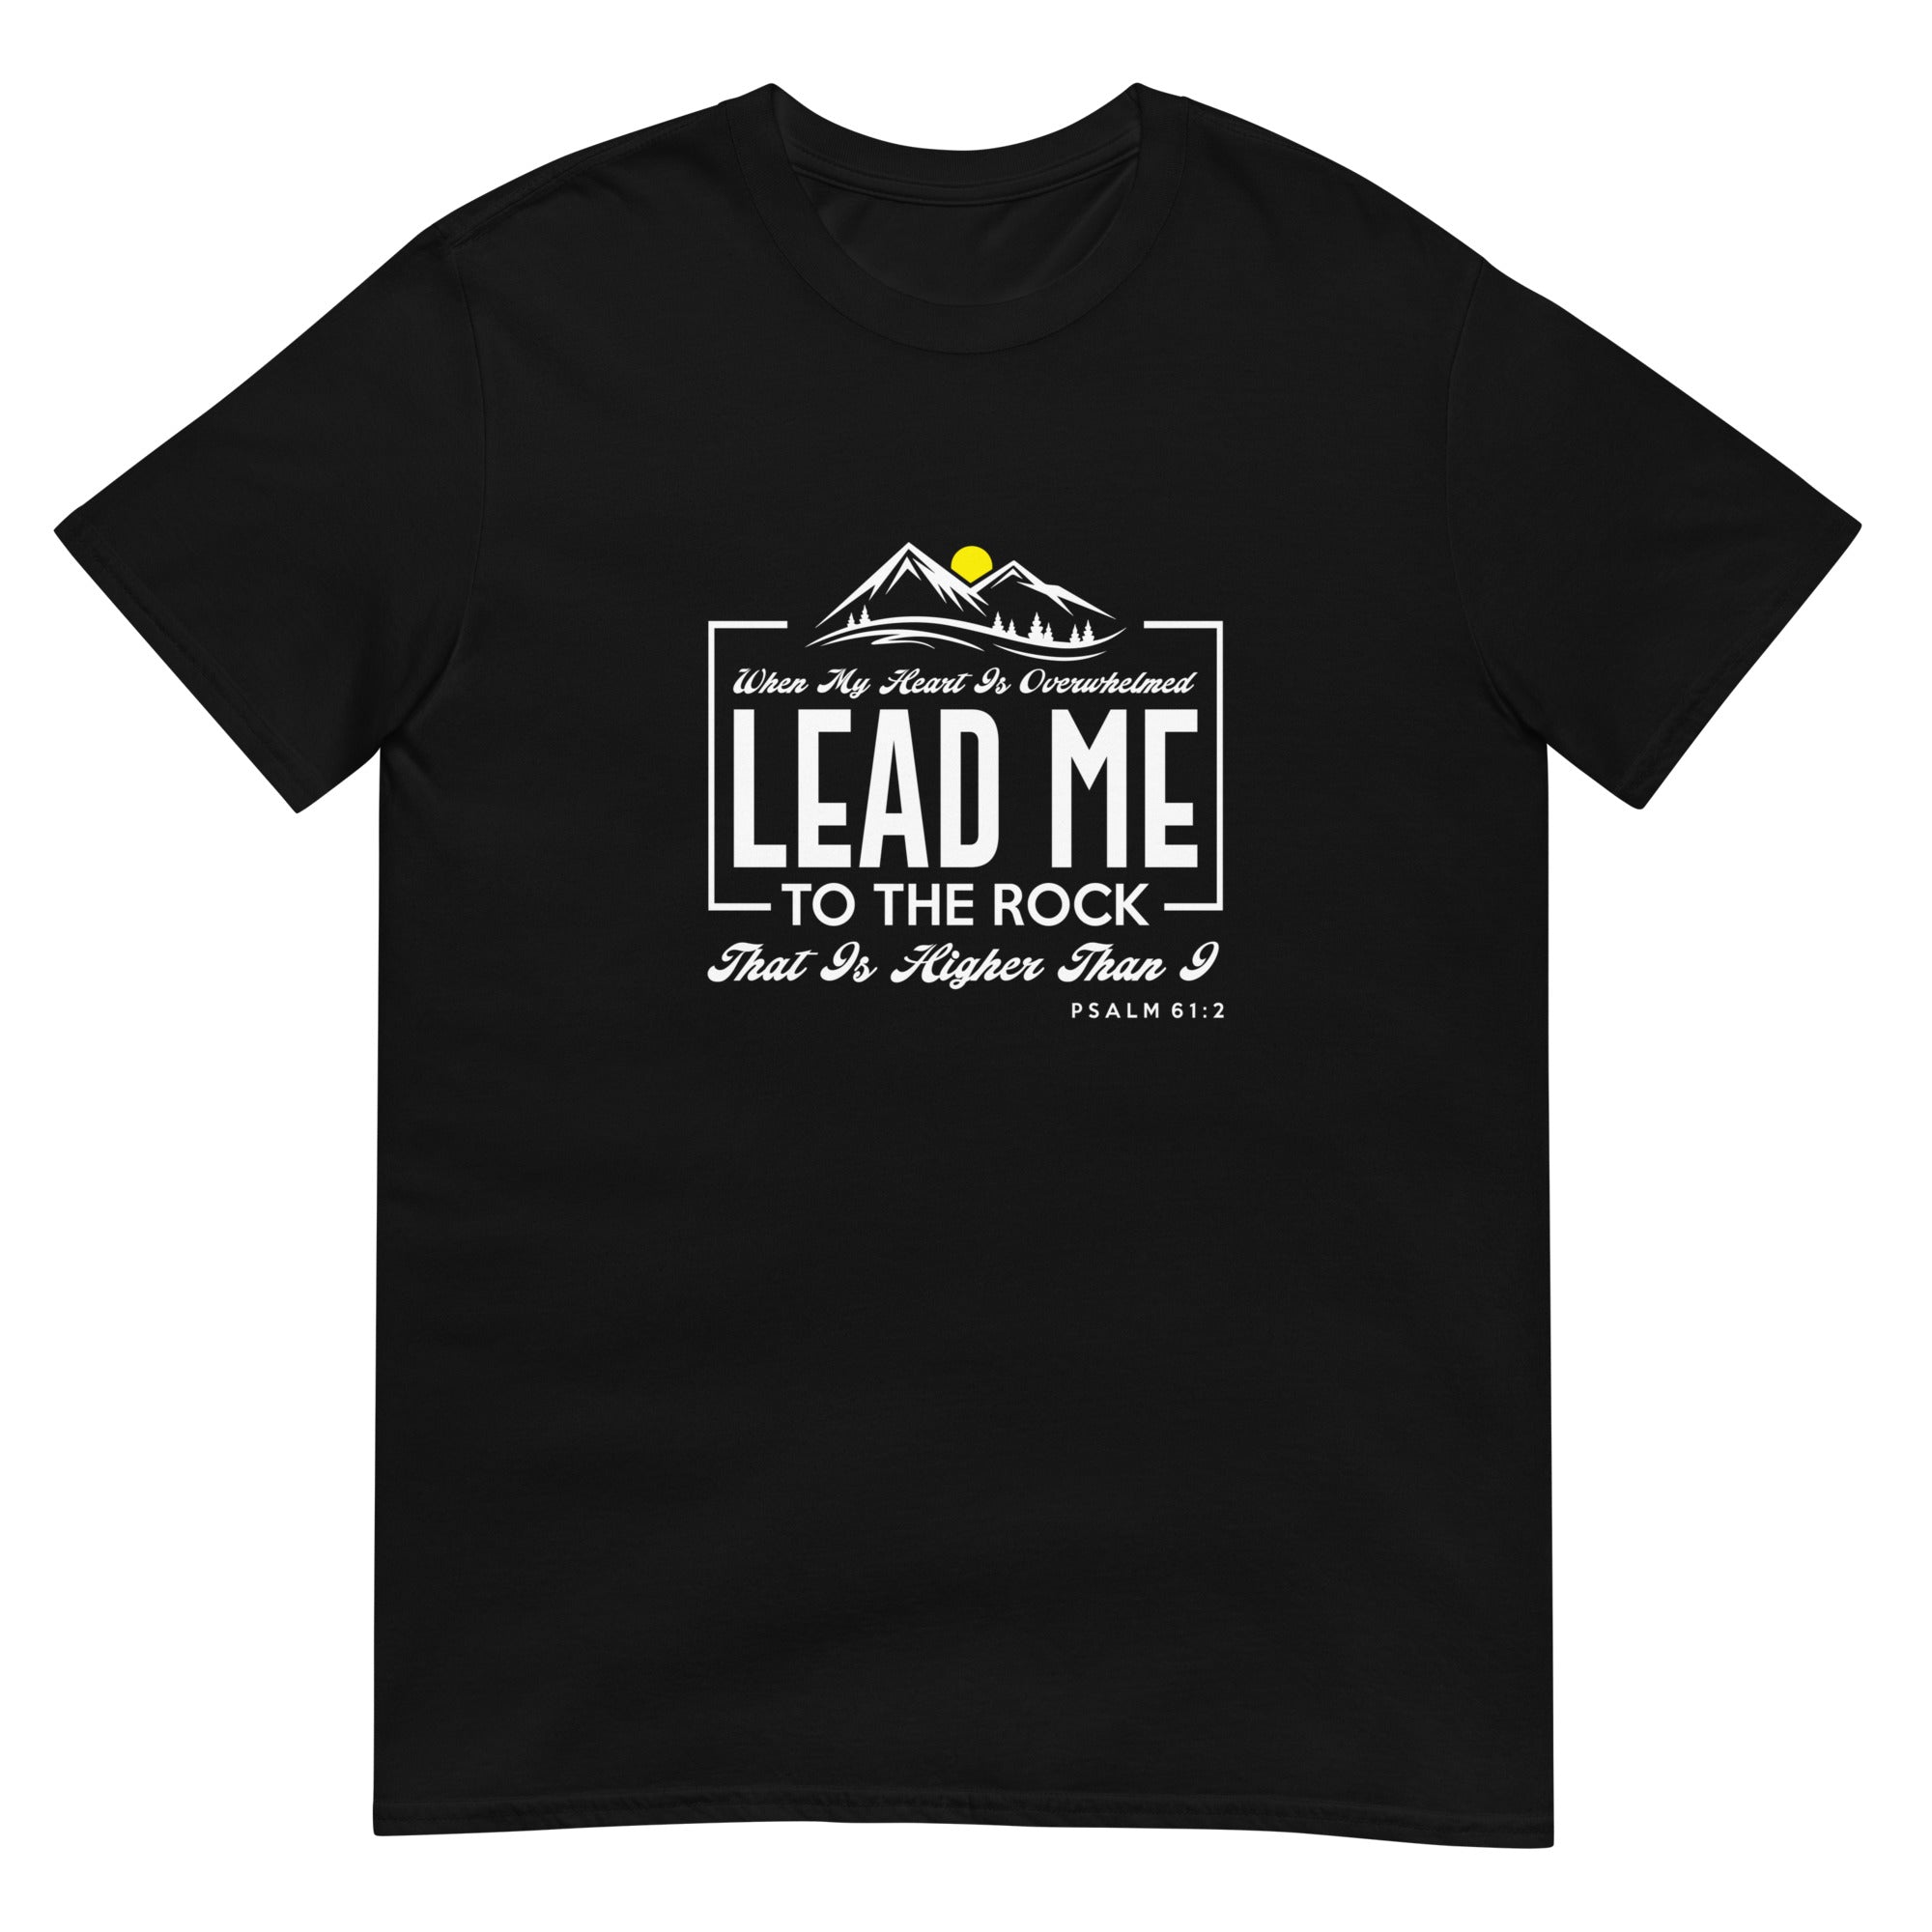 Lead Me to the Rock Short-Sleeve Unisex T-Shirt